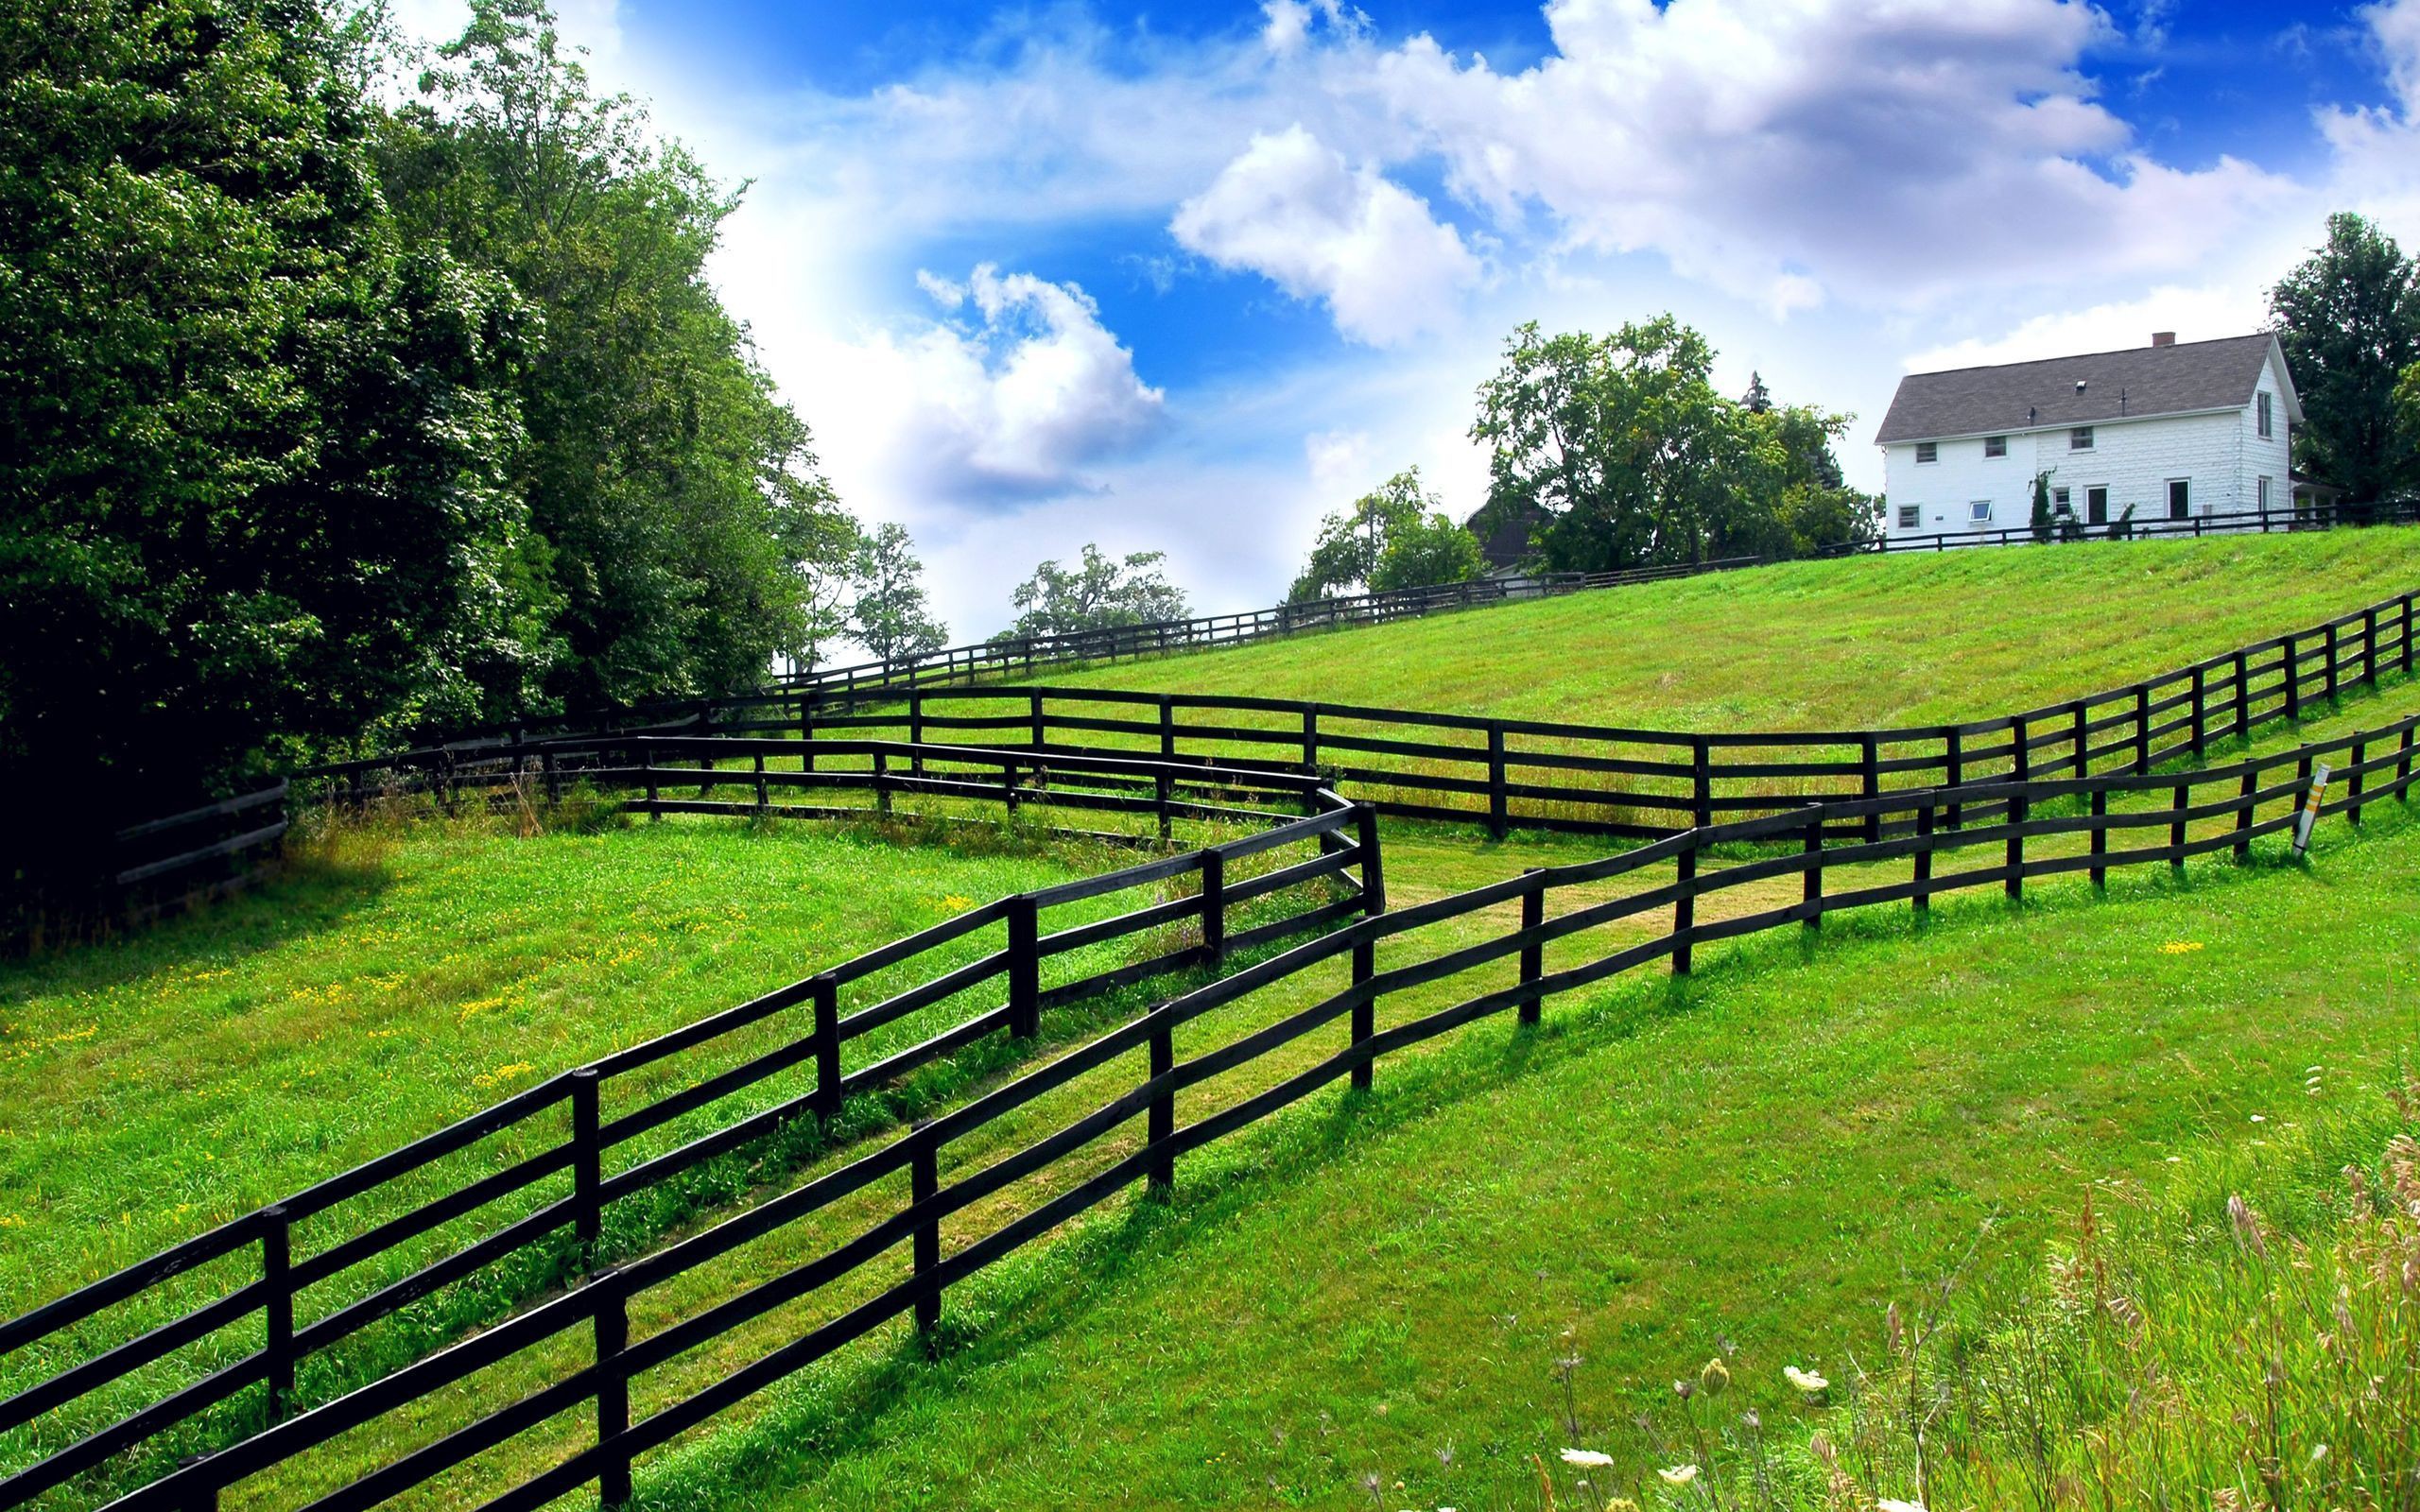 General 2560x1600 house fence field